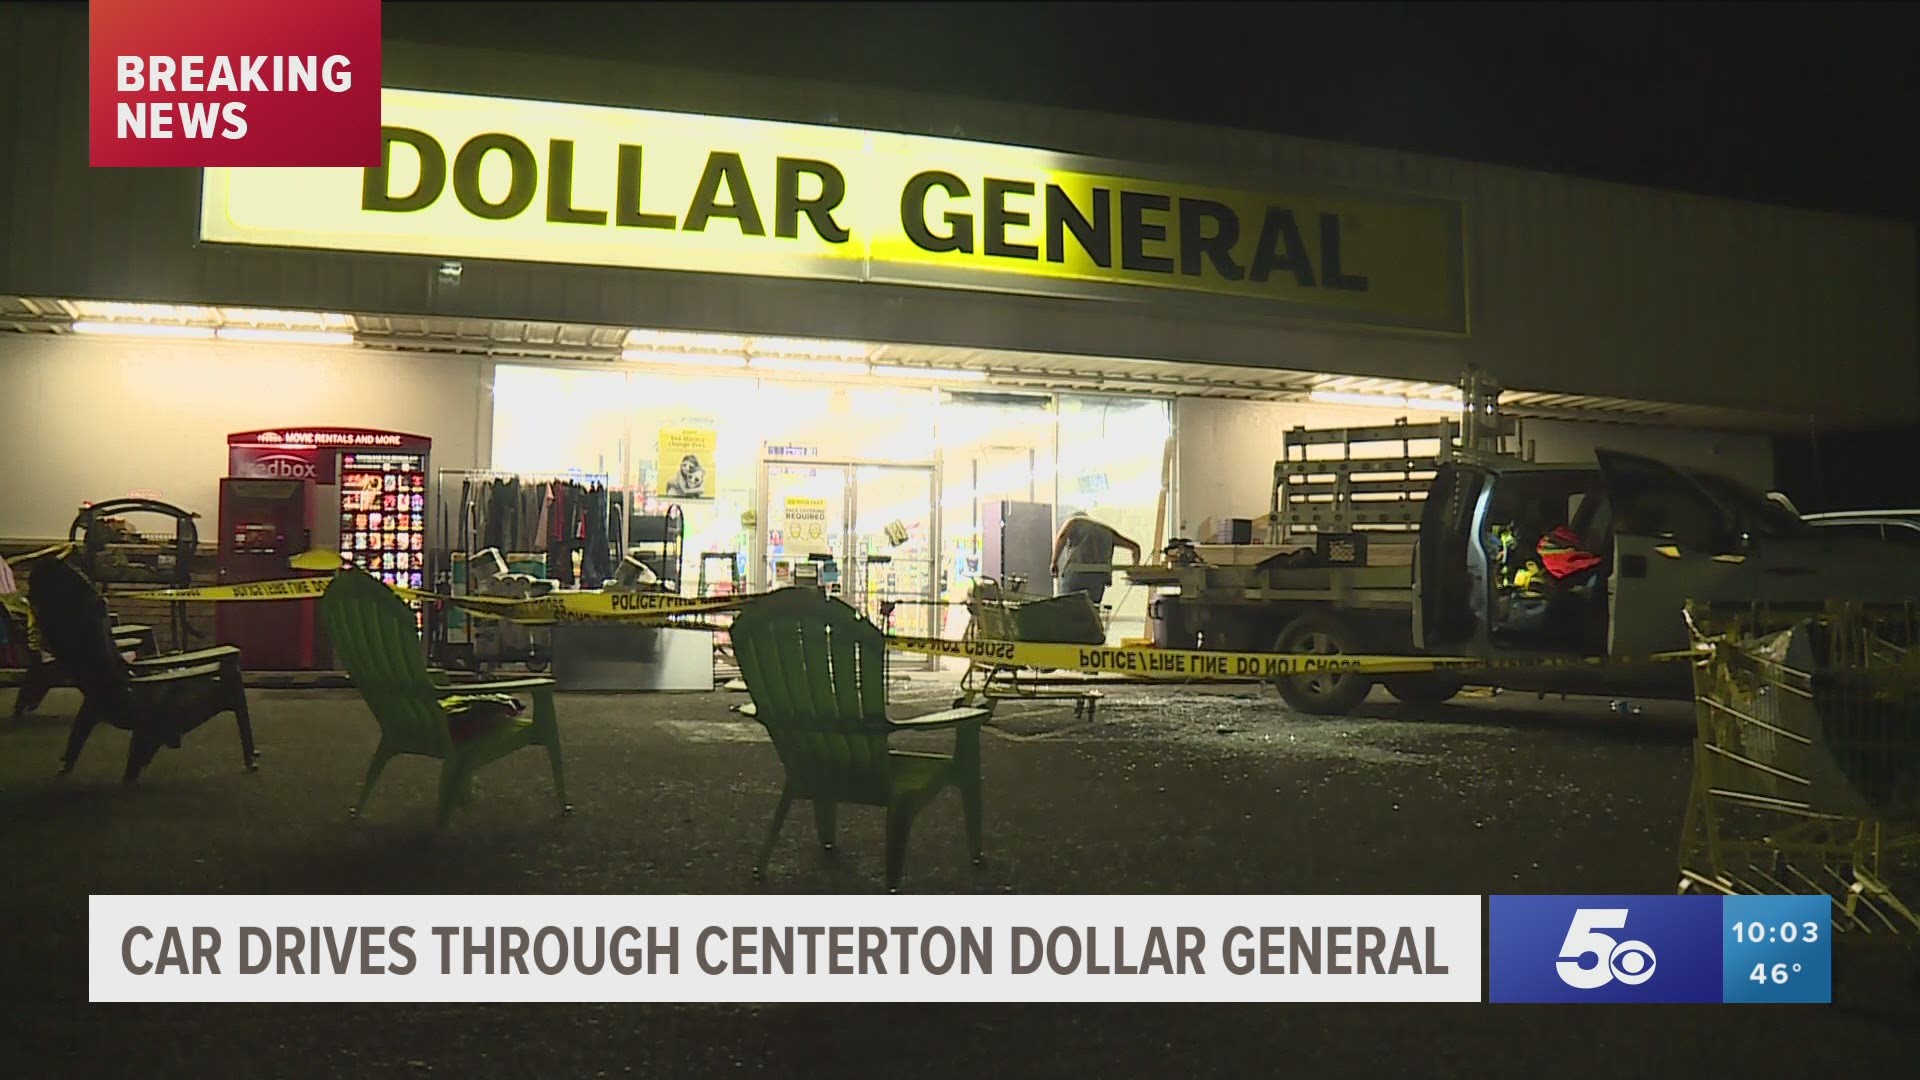 One person has been hospitalized after a vehicle ran into a Dollar General store in Centerton this afternoon.